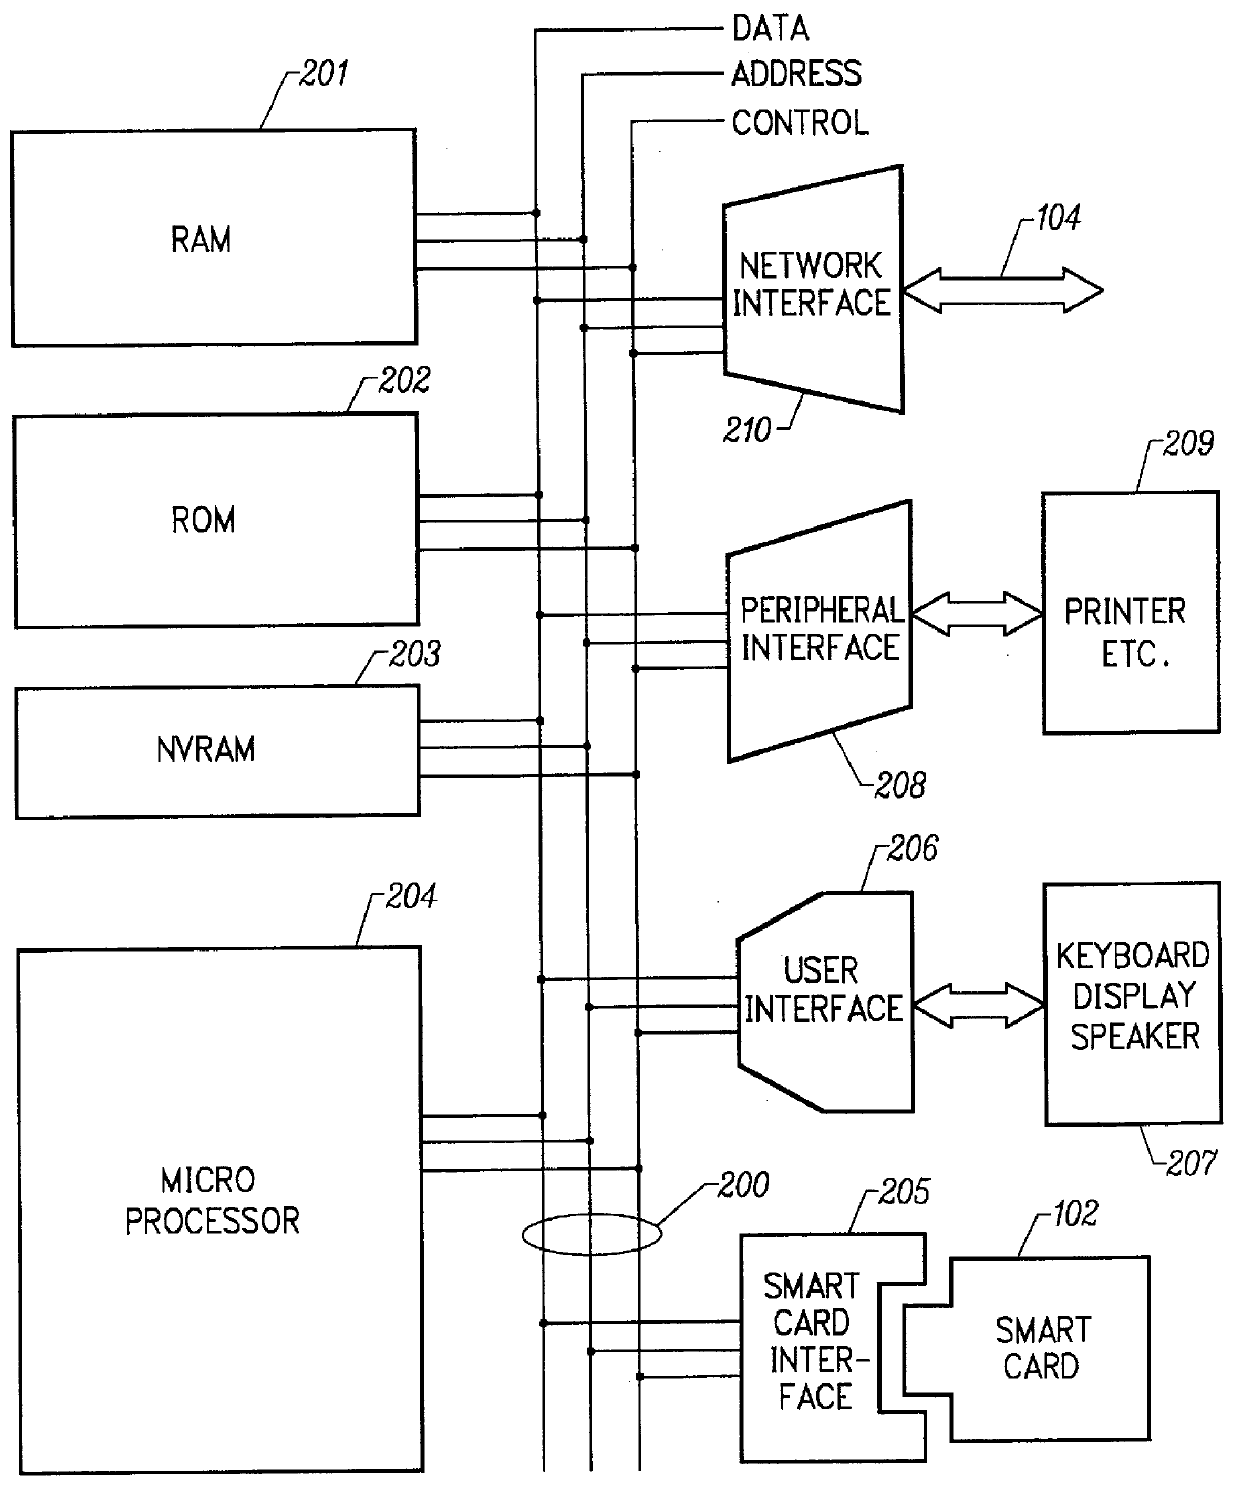 Mechanism for dynamically binding a network computer client device to an approved internet service provider